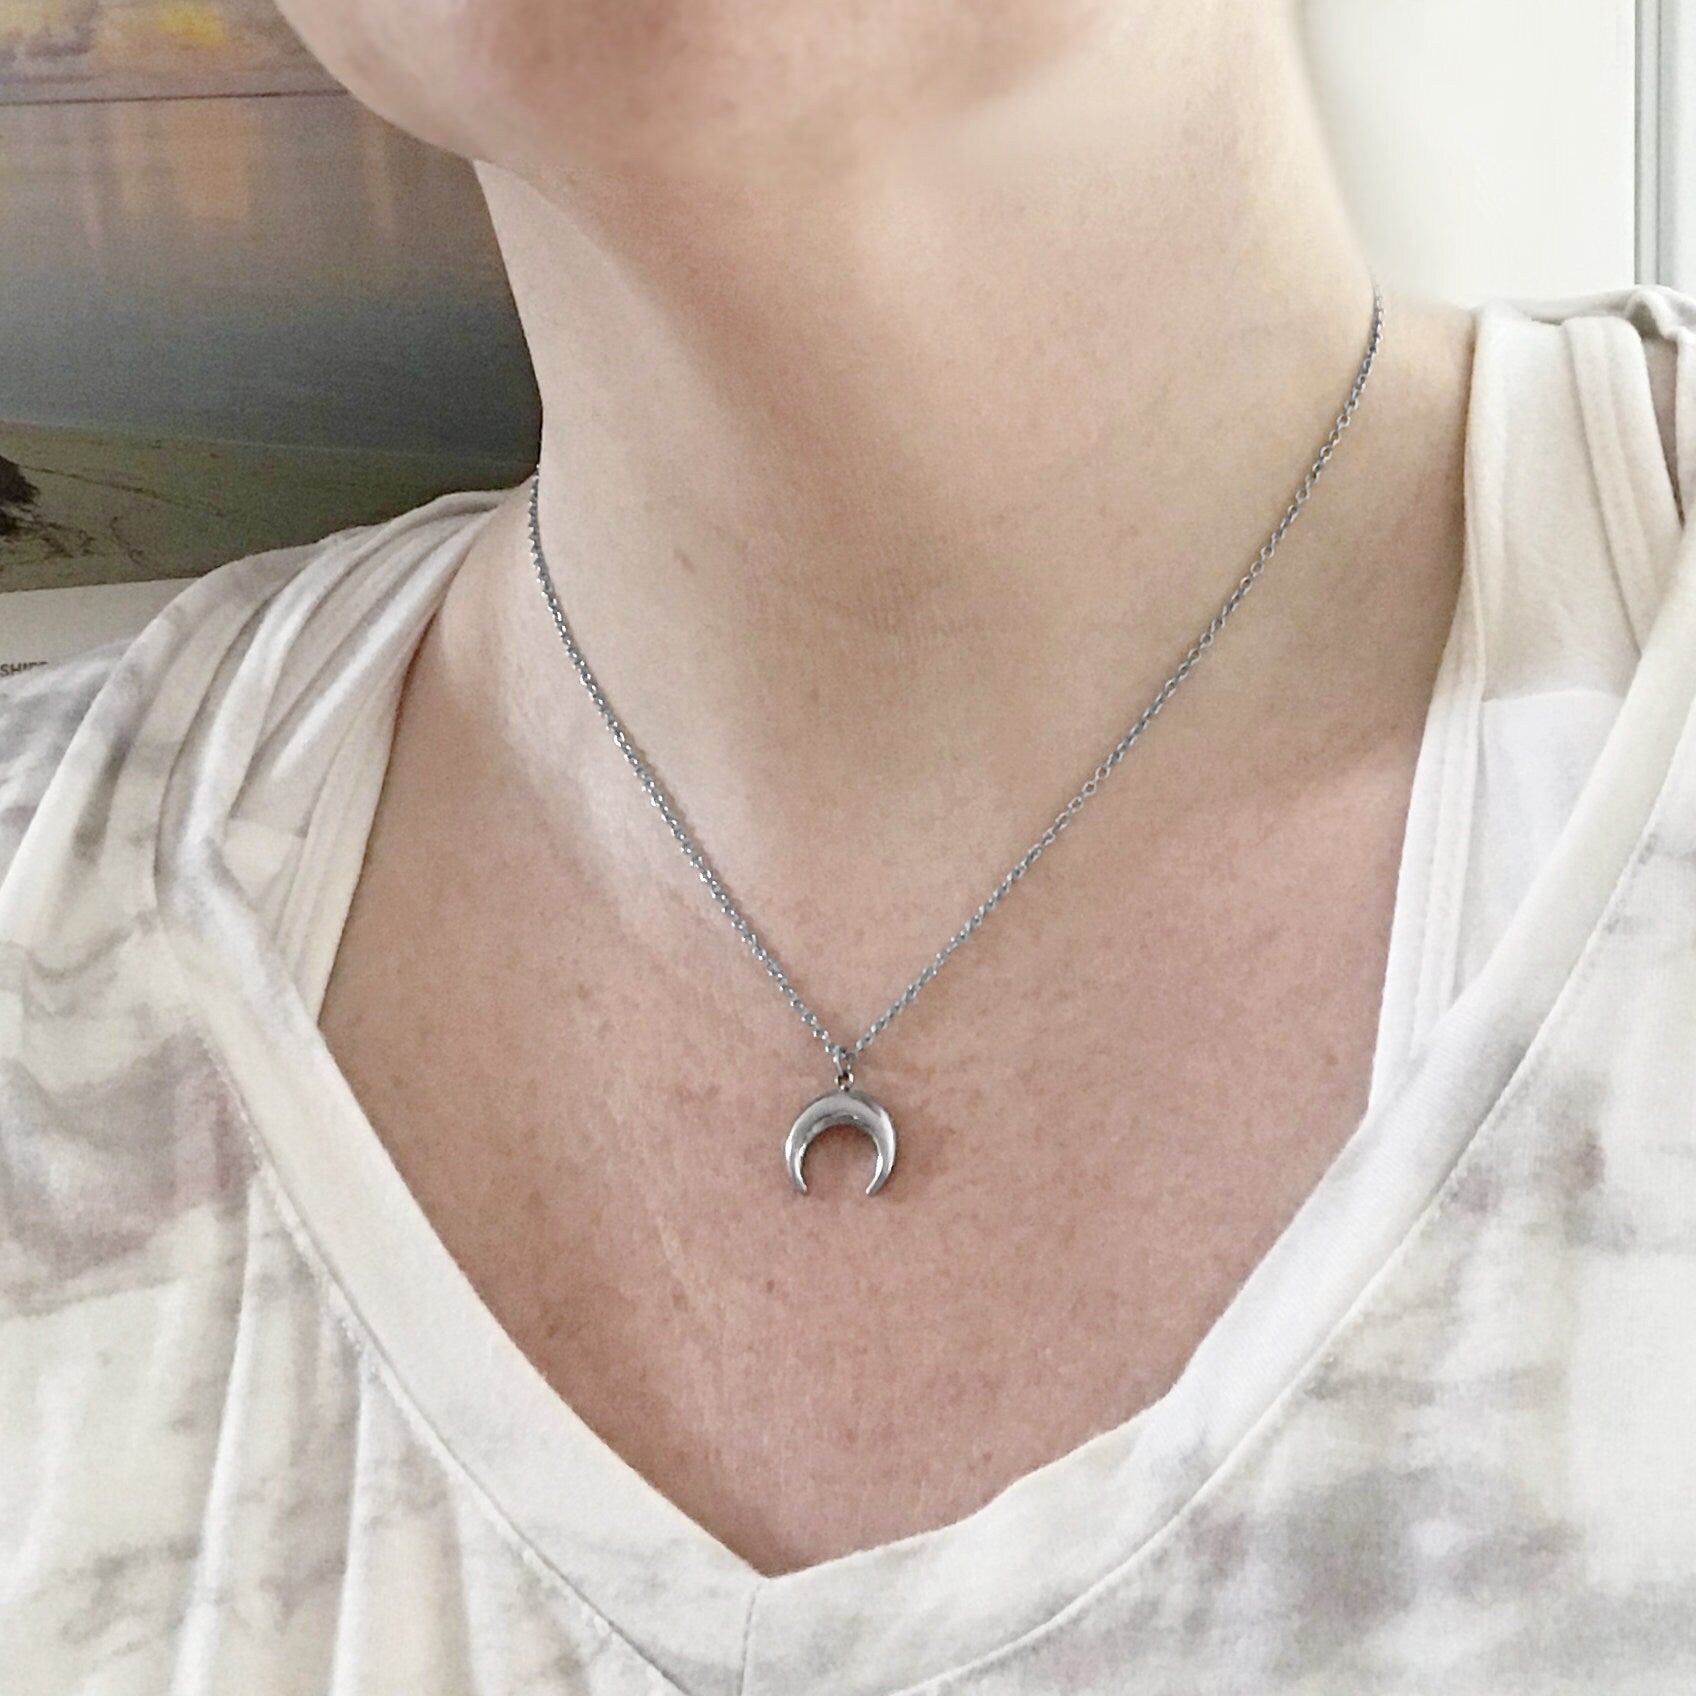 Upside Down Moon Necklace, Double Horn Jewelry, Crescent Pendant, Layering Necklace, Minimalist Style, Half Moon